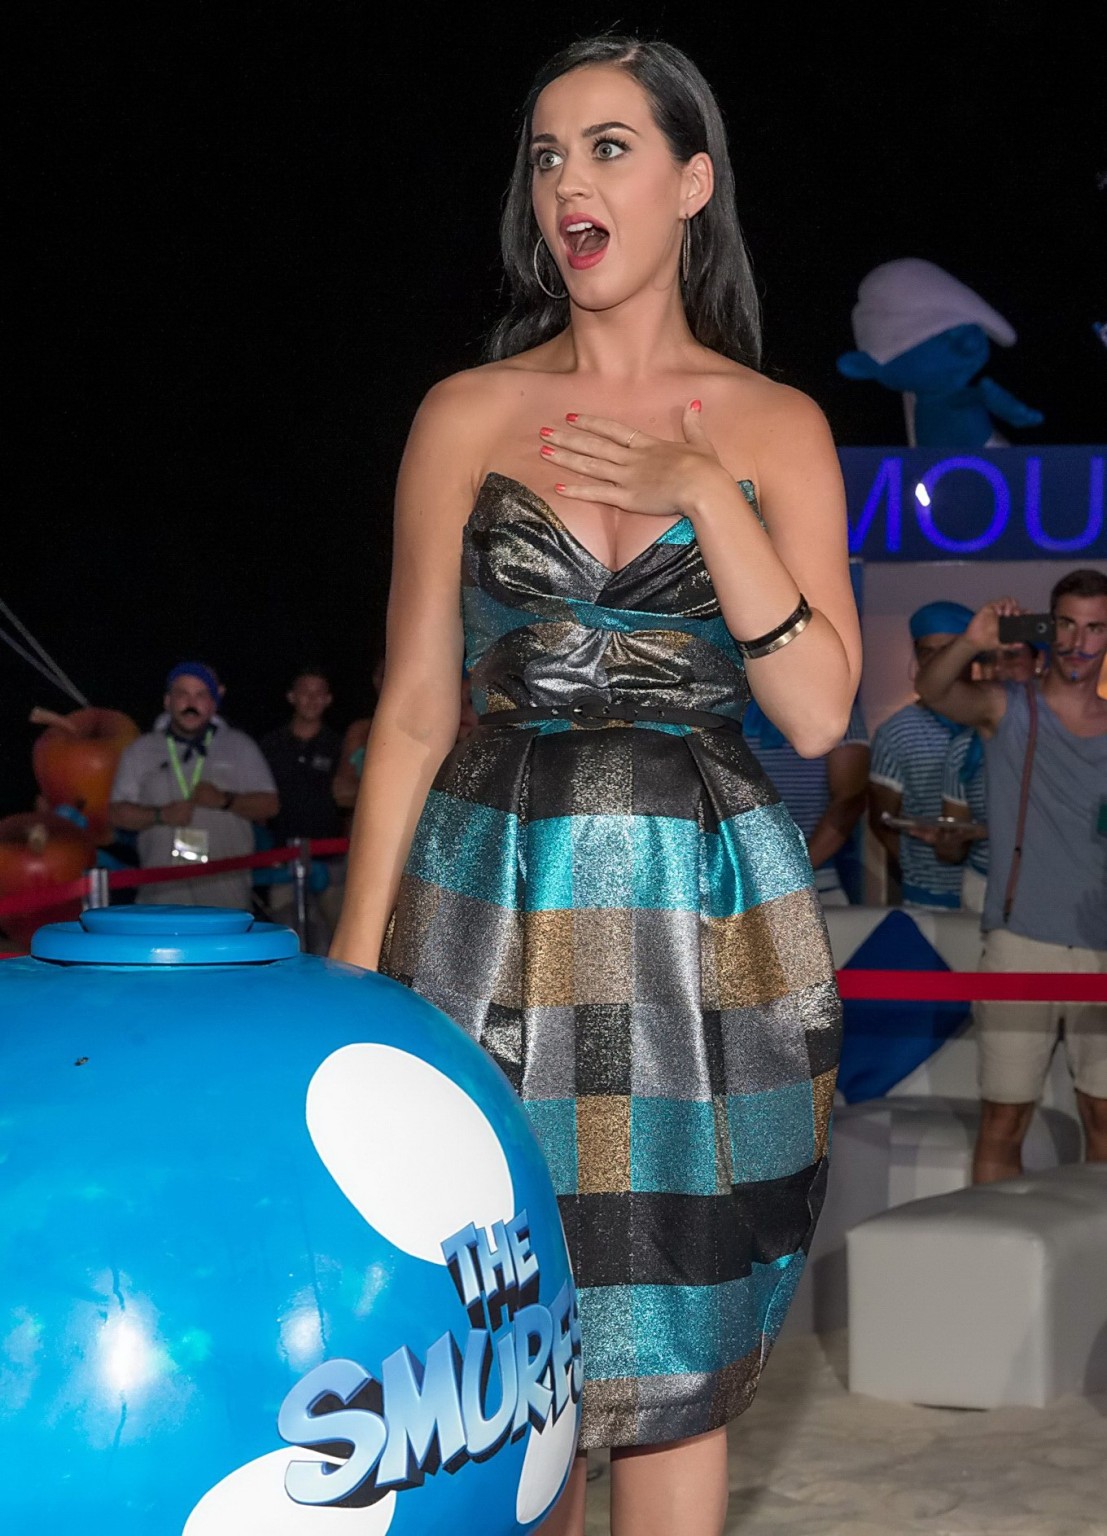 Katy Perry showing big cleavage in a hot strapless dress at The Smurfs 2 party a